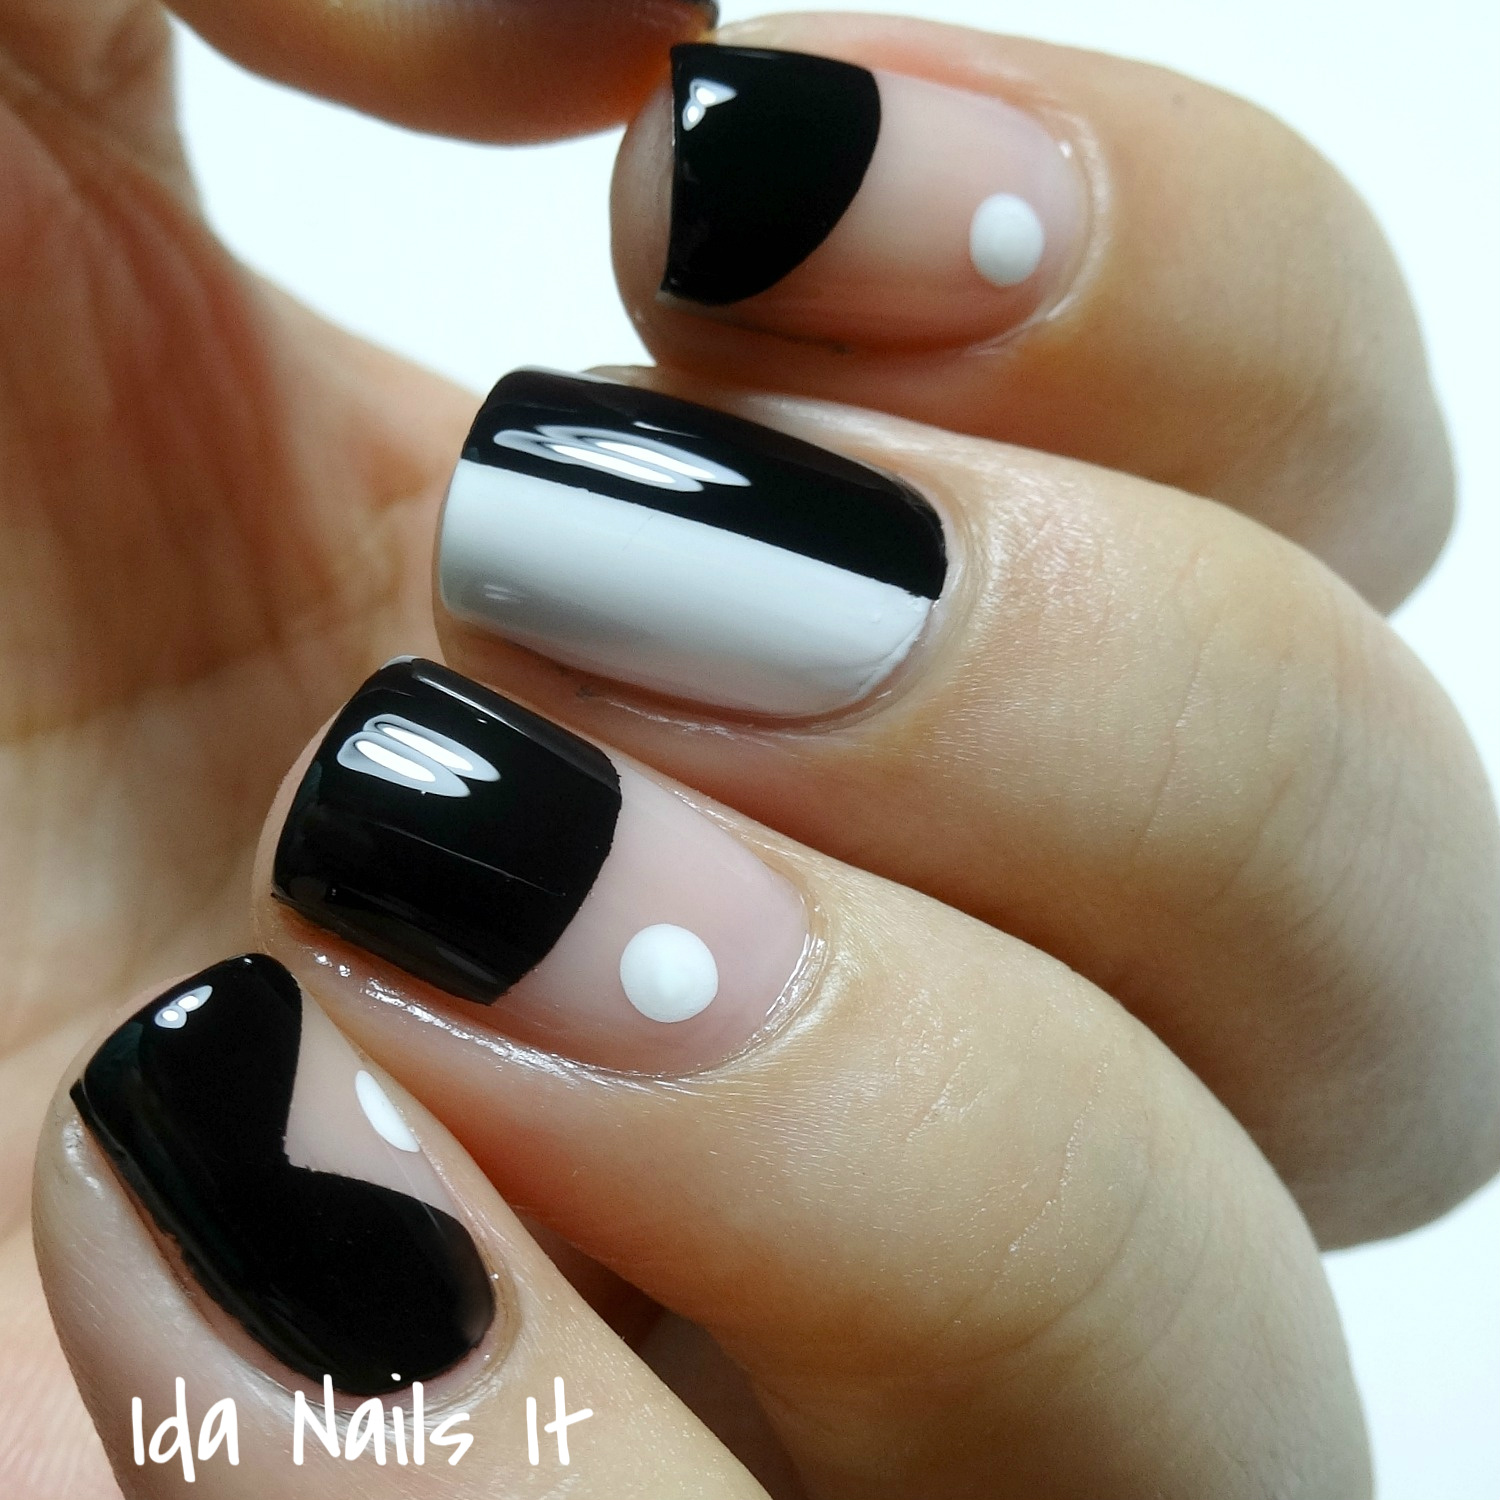 Ida Nails It: Paint All the Nails Presents: Monochrome